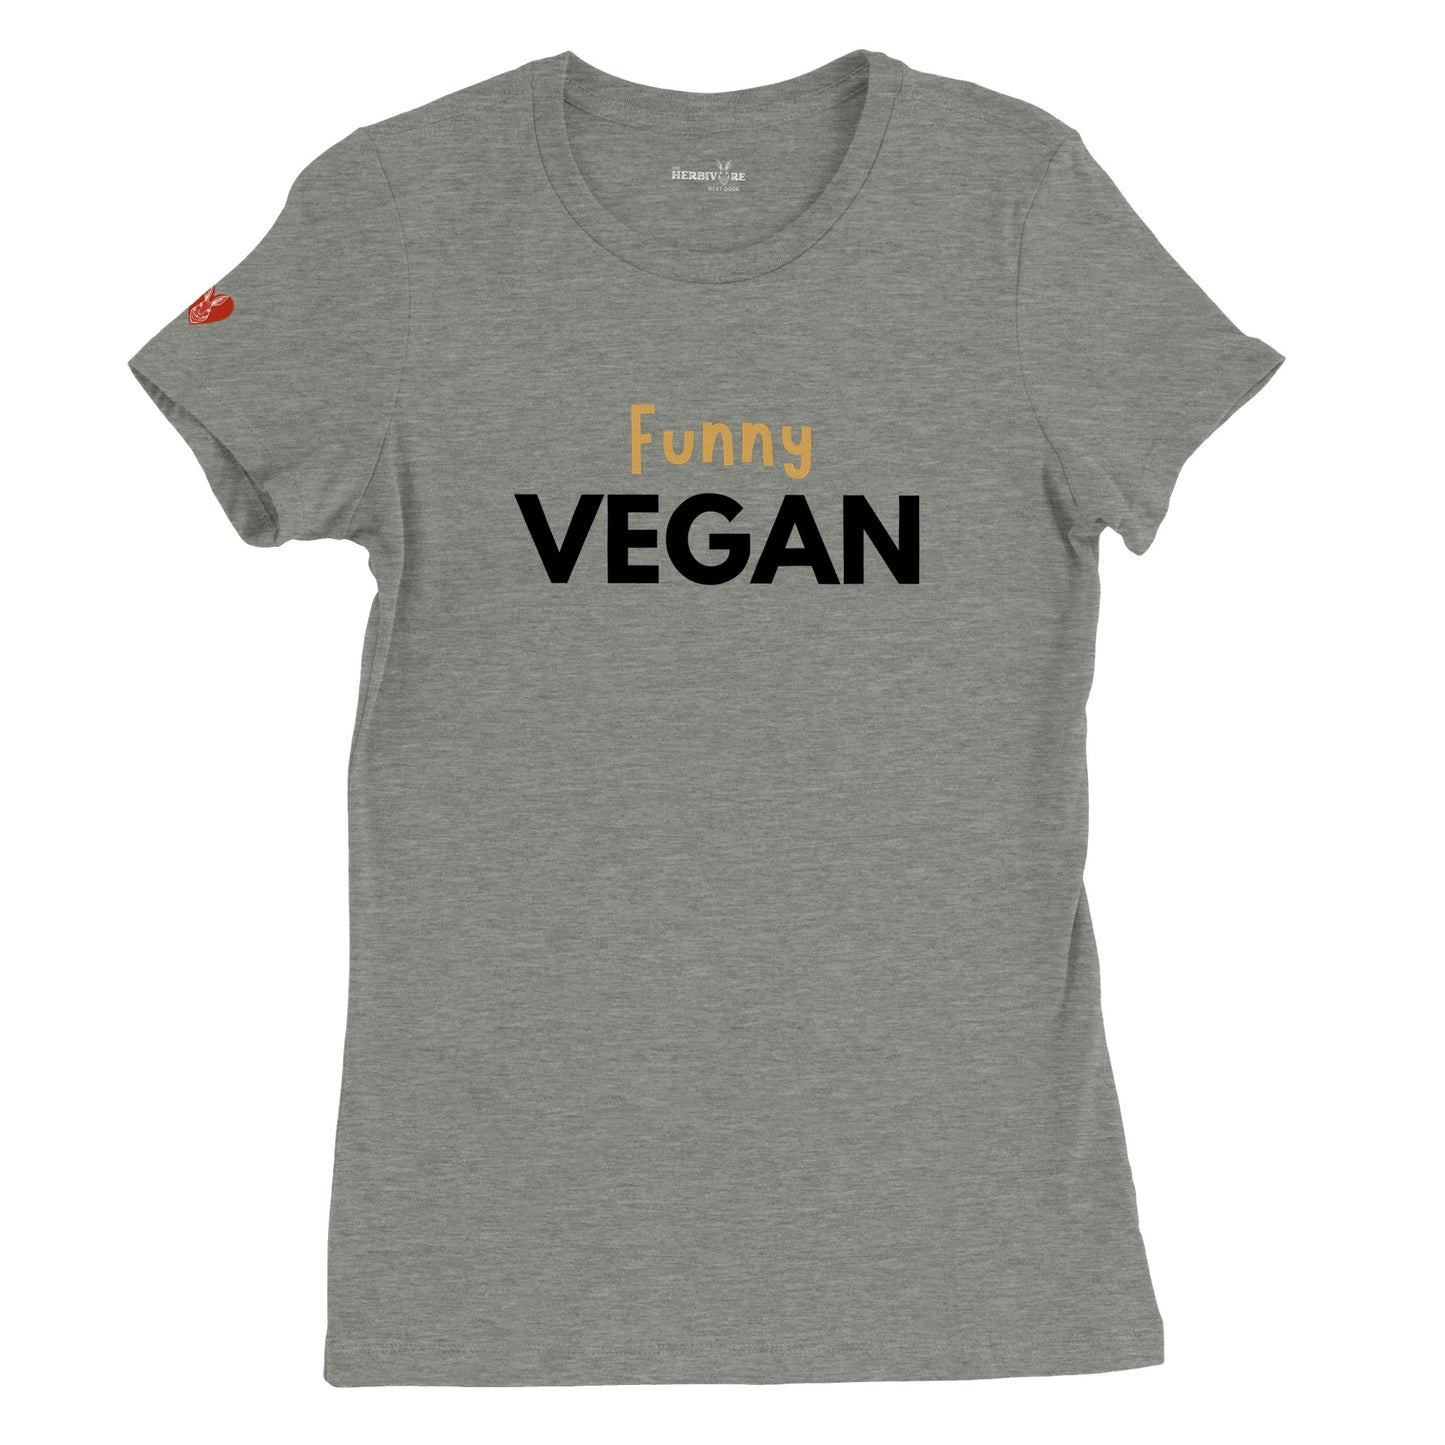 Funny Vegan - Women's style (Women's run small - get one size up from normal unisex)